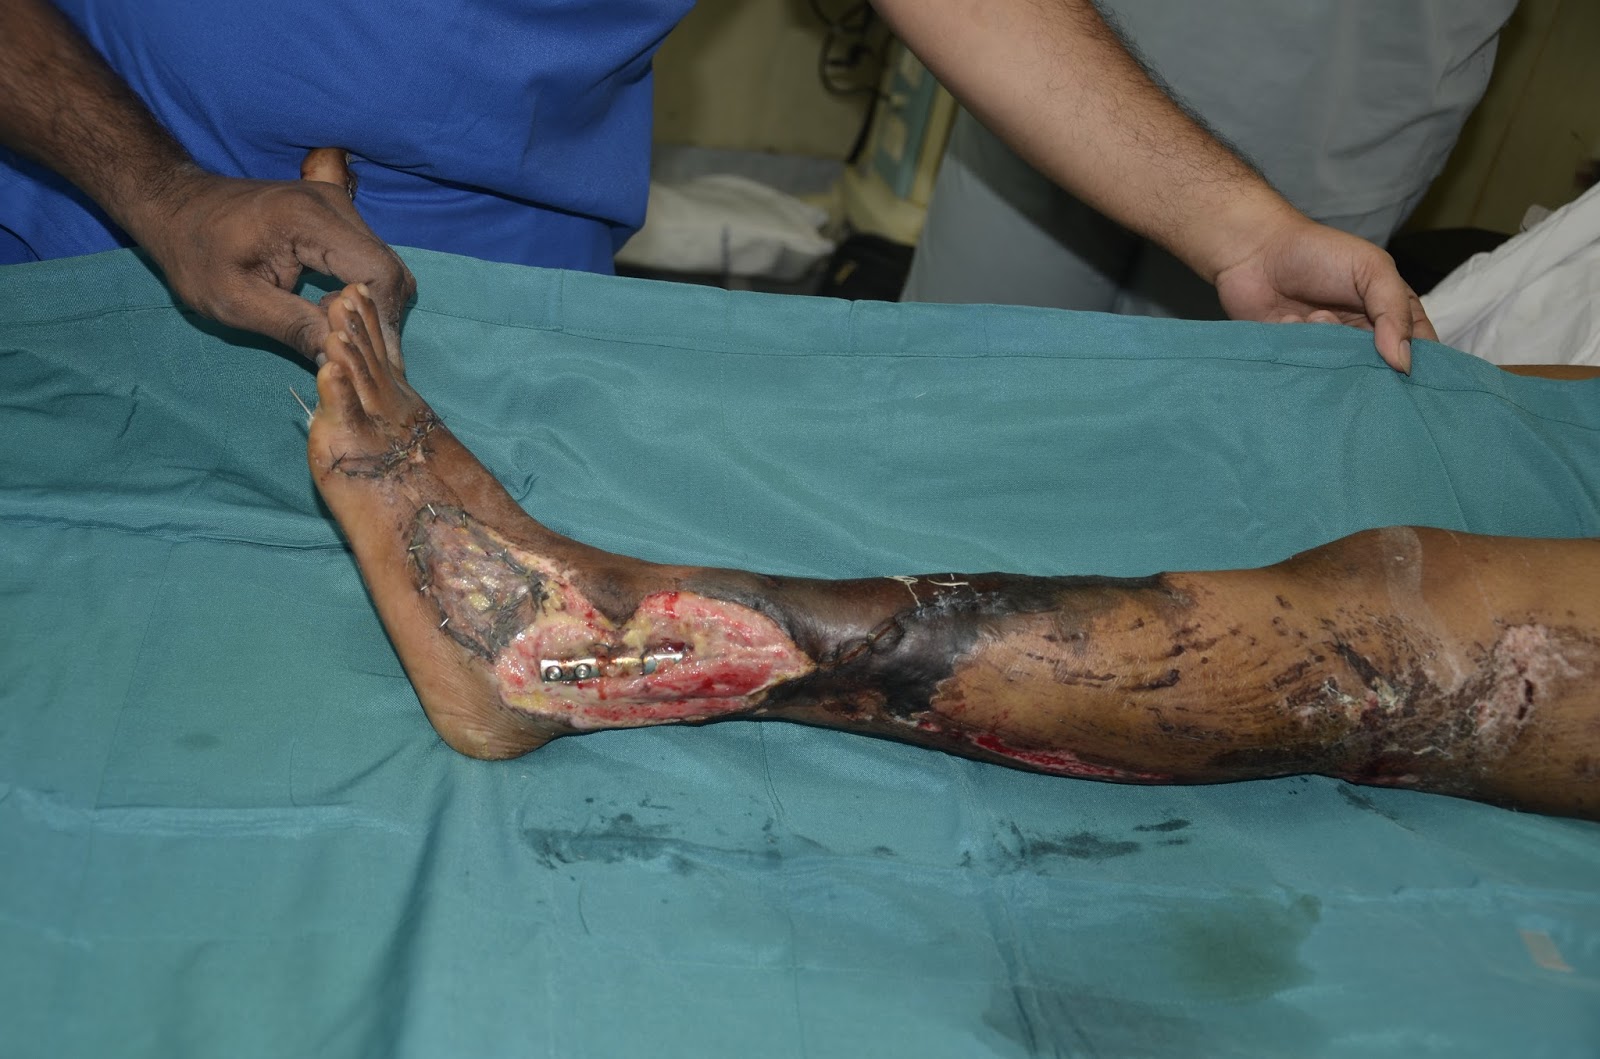 CRUSH INJURY FOOT, LOWER LIMB INJURIES AND LIMB SALVAGE: CRUSH INJURY LEG  WITH BOTH BONE FRACTURE LEG - GRACILSI FREE FLAP FAILURE - NEGATIVE  PRESSURE WOUND THERAPY AND SKIN GRAFTING - OUTCOME